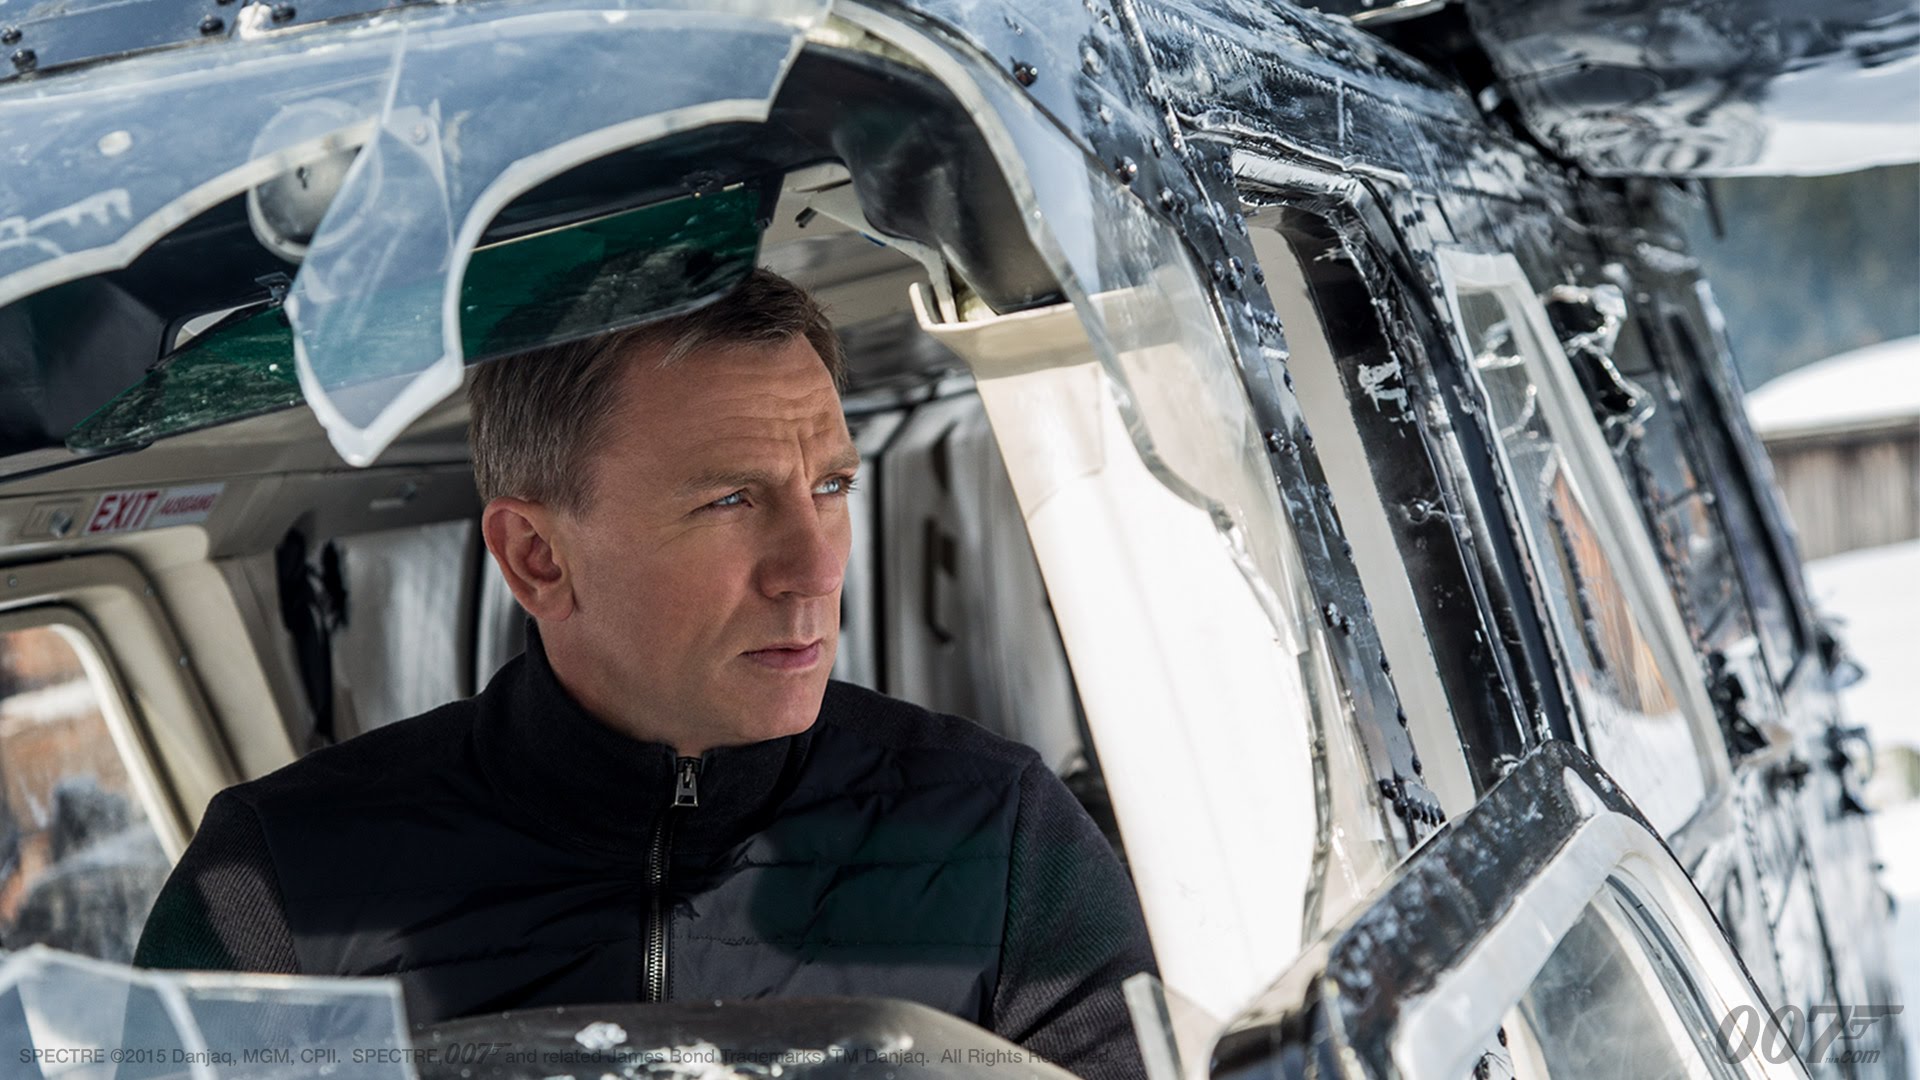 SPECTRE Brings Back the Old-Fashioned Bond Formula